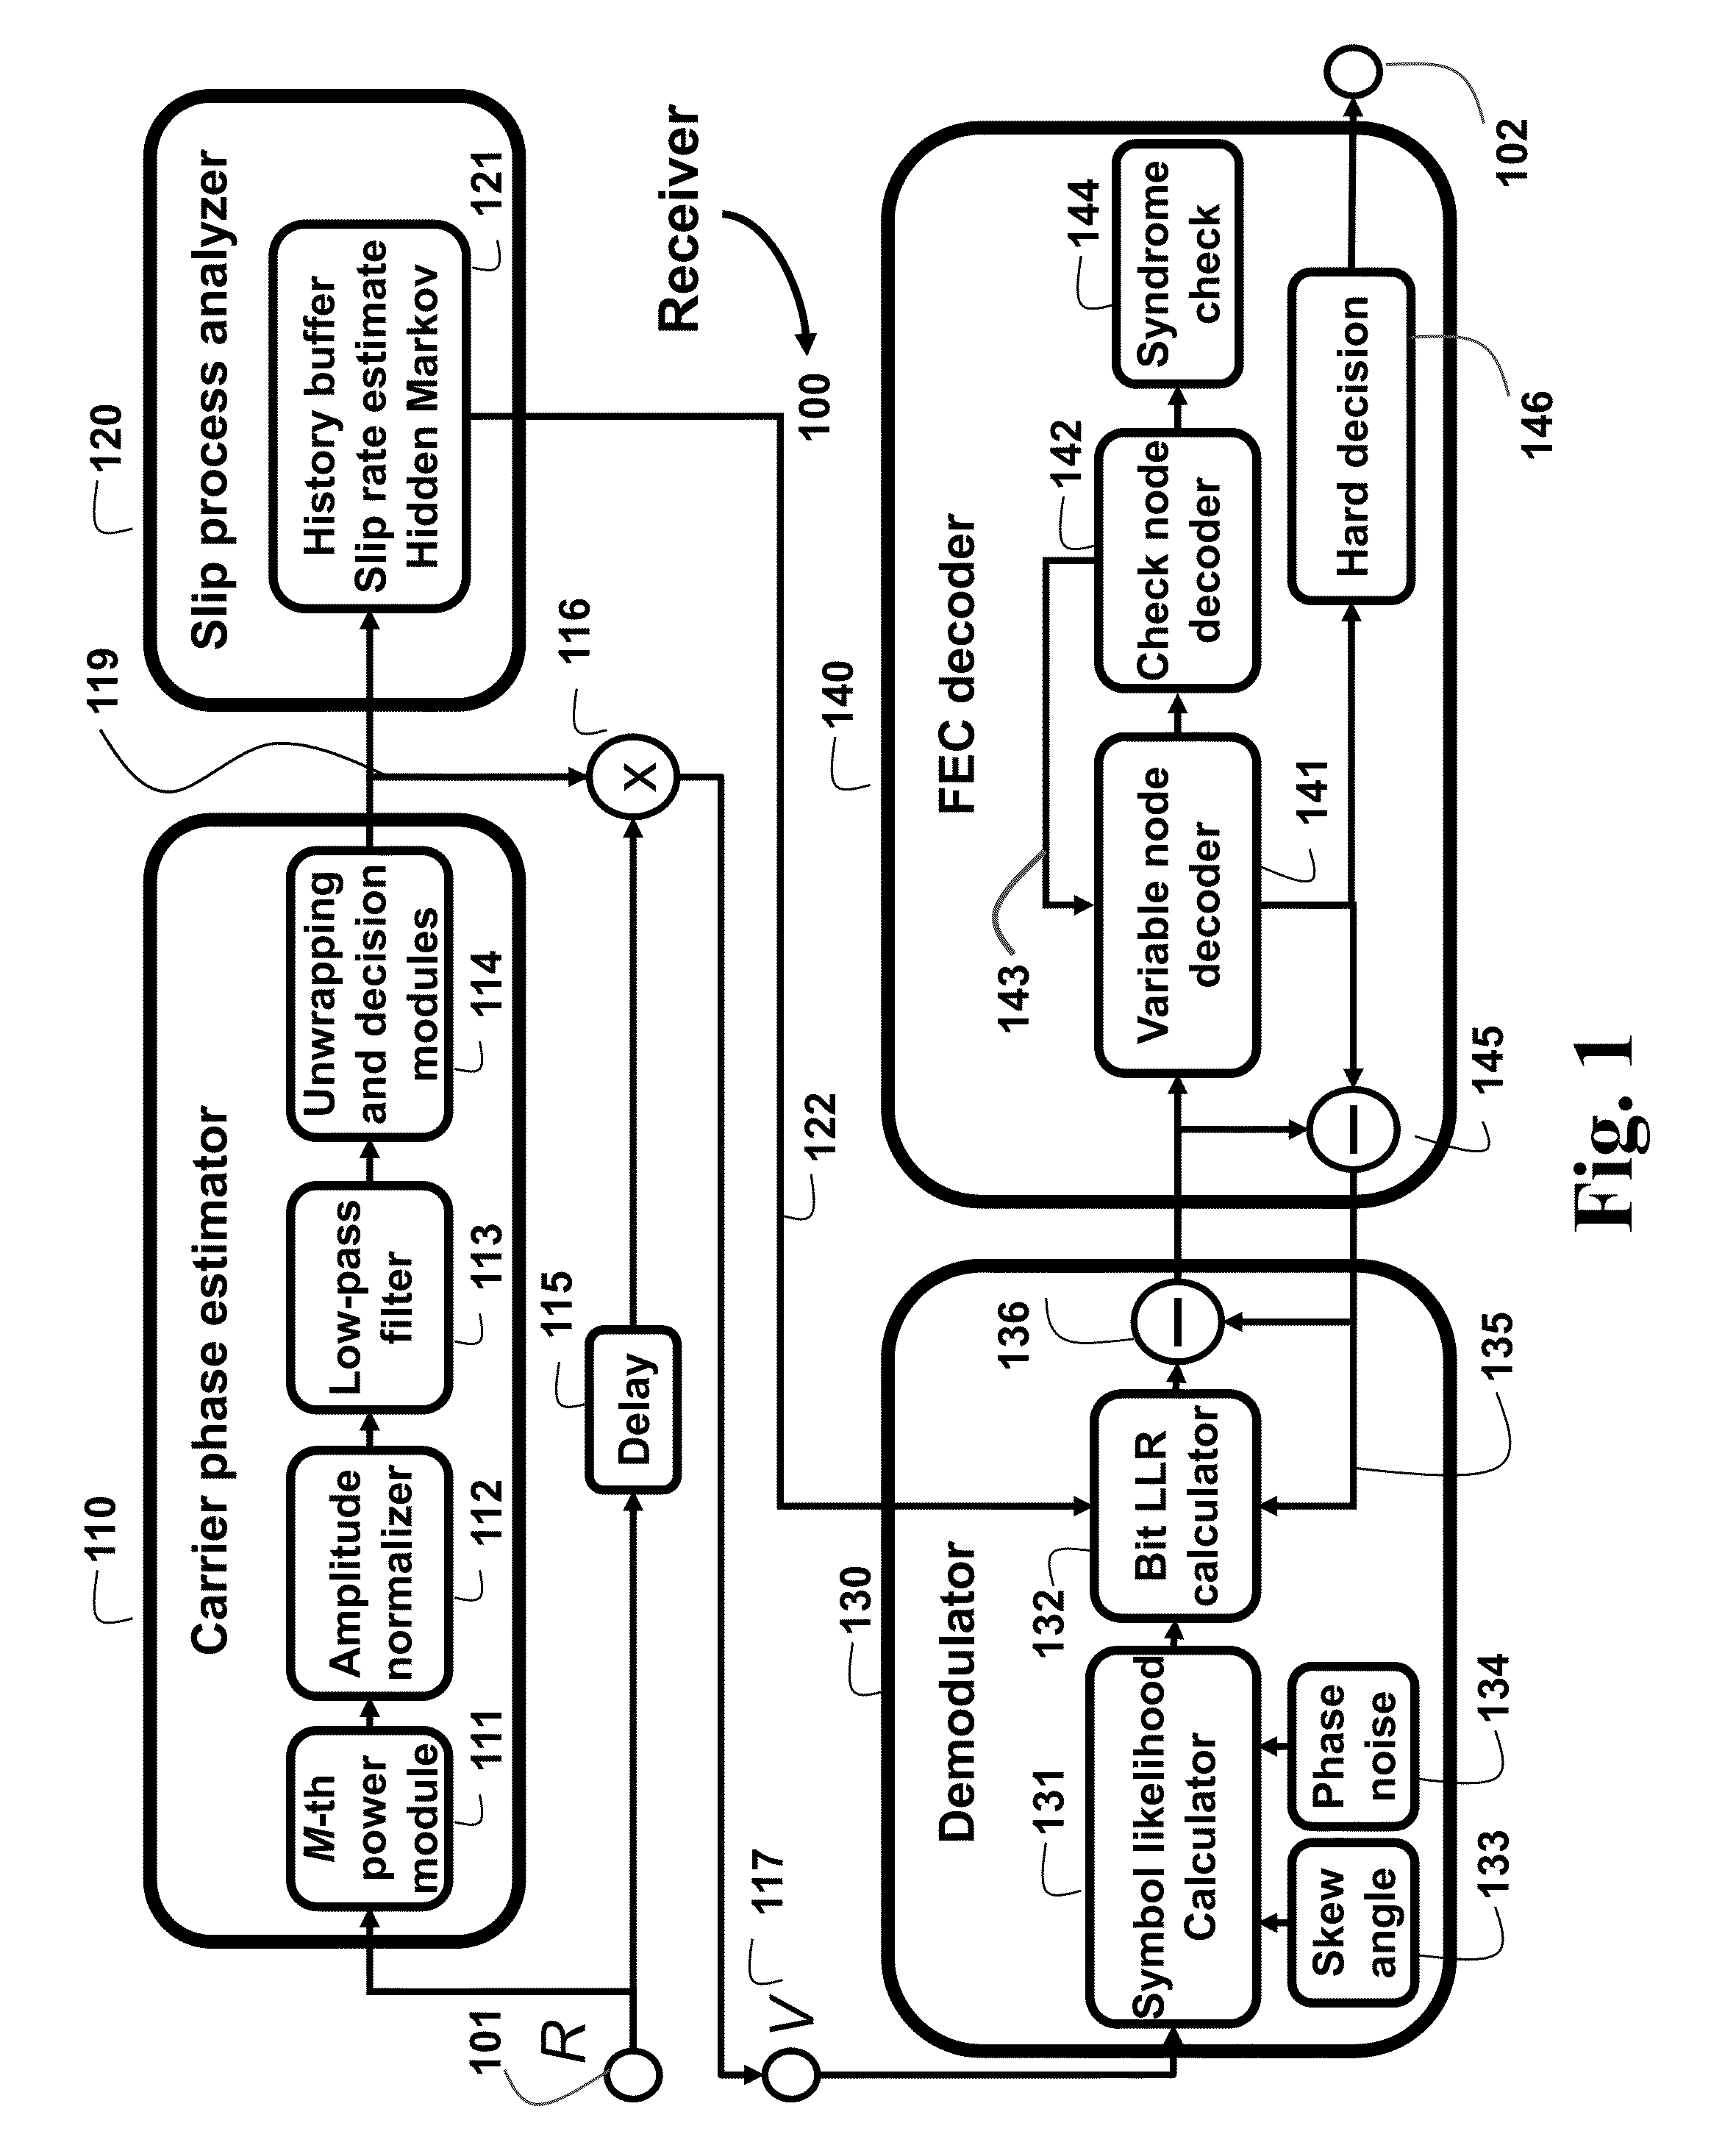 System and Method for Recovering Carrier Phase in Optical Communications